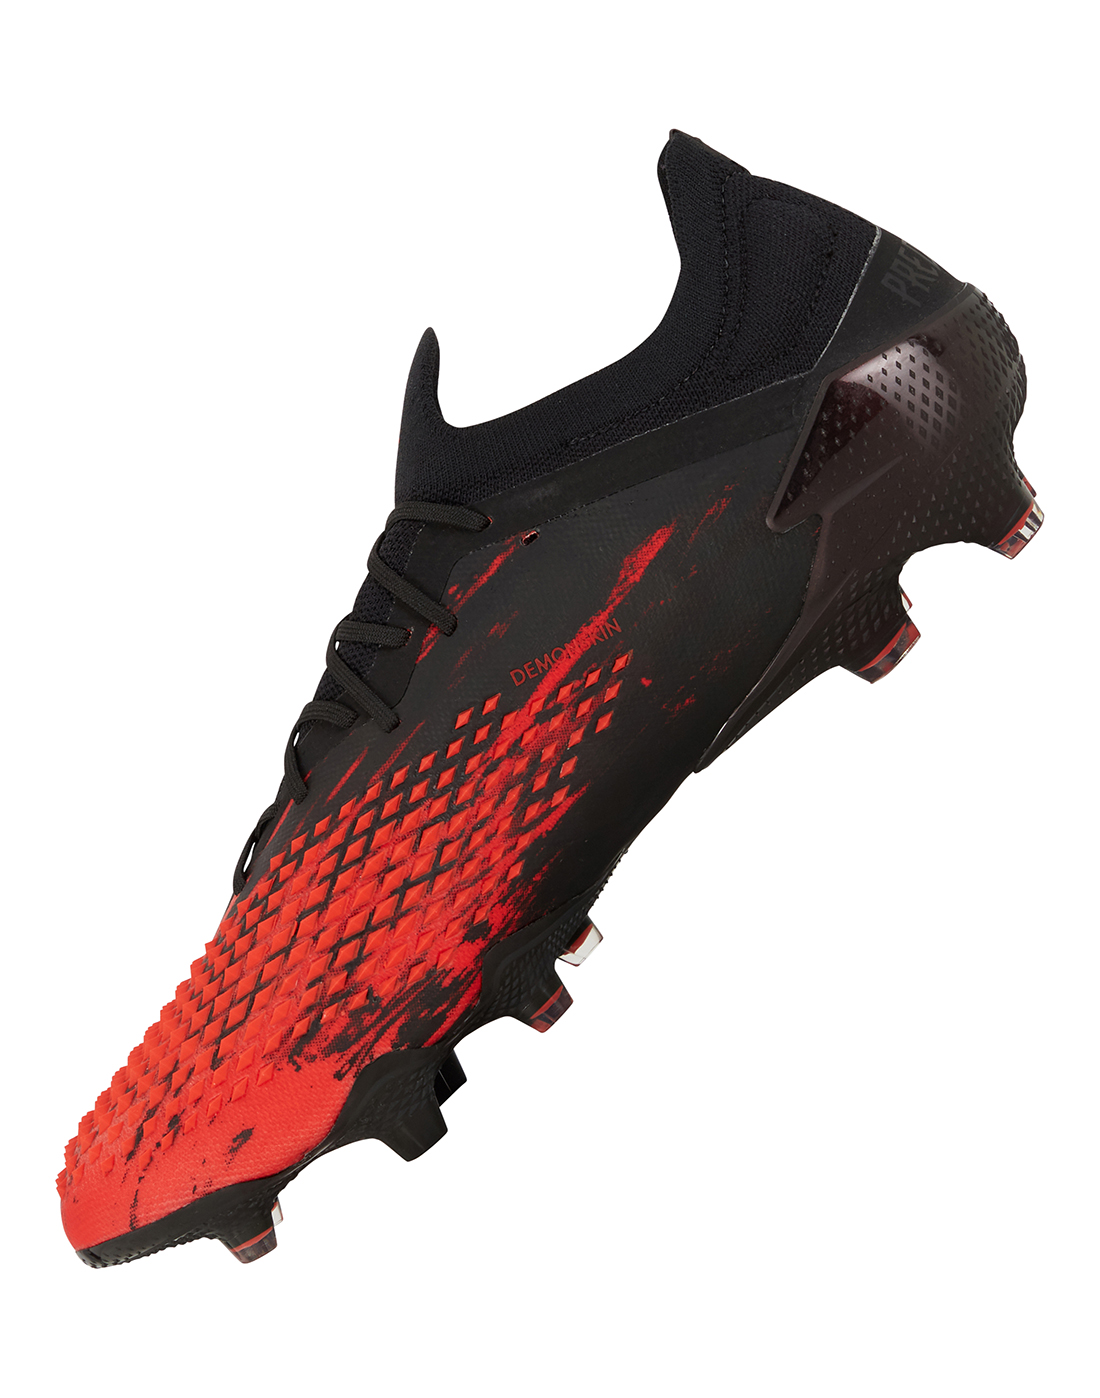 adidas Q u0026A What the Predator collection means to adidas